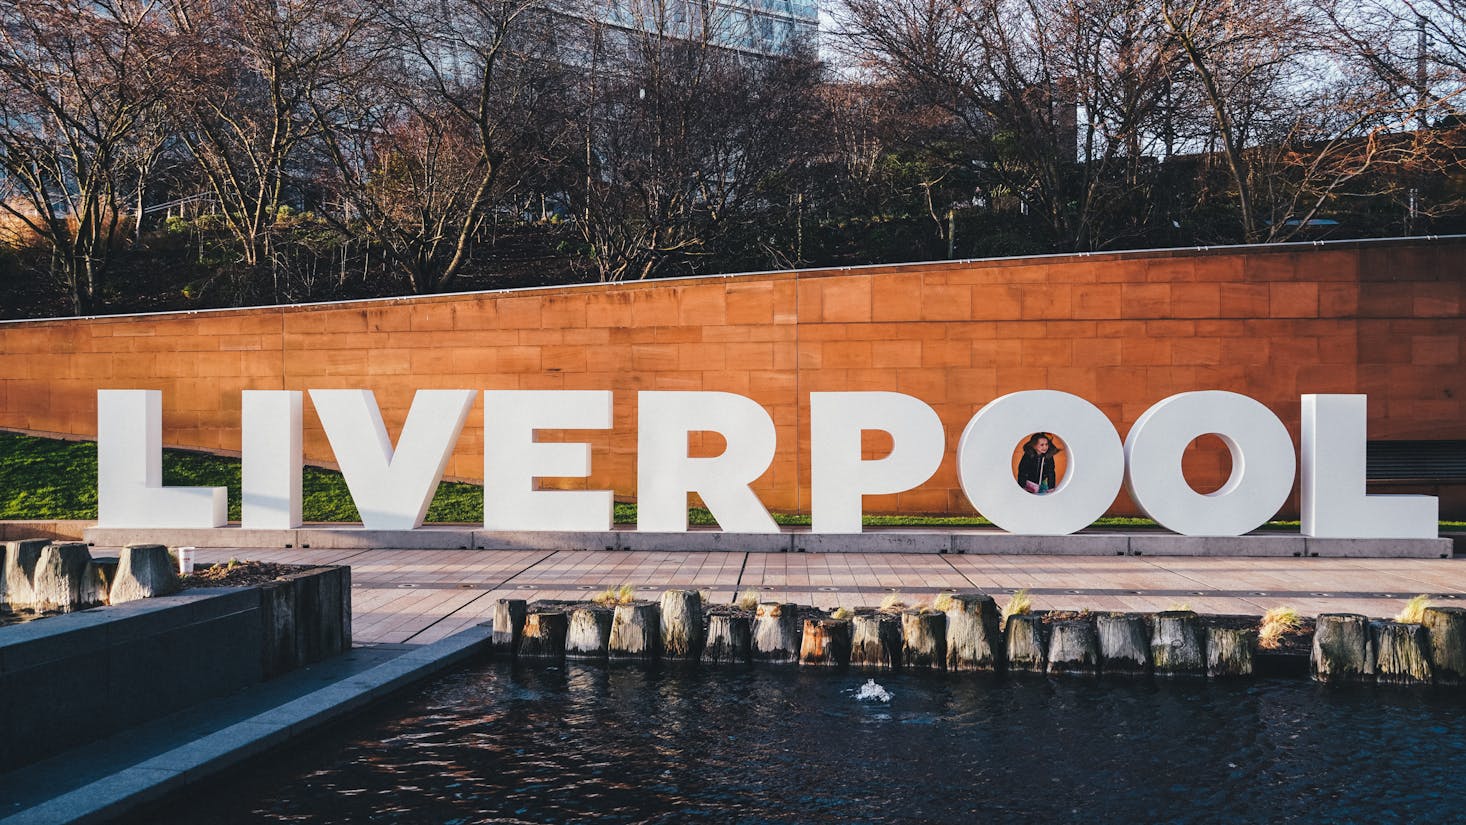 Things to do with kids in Liverpool